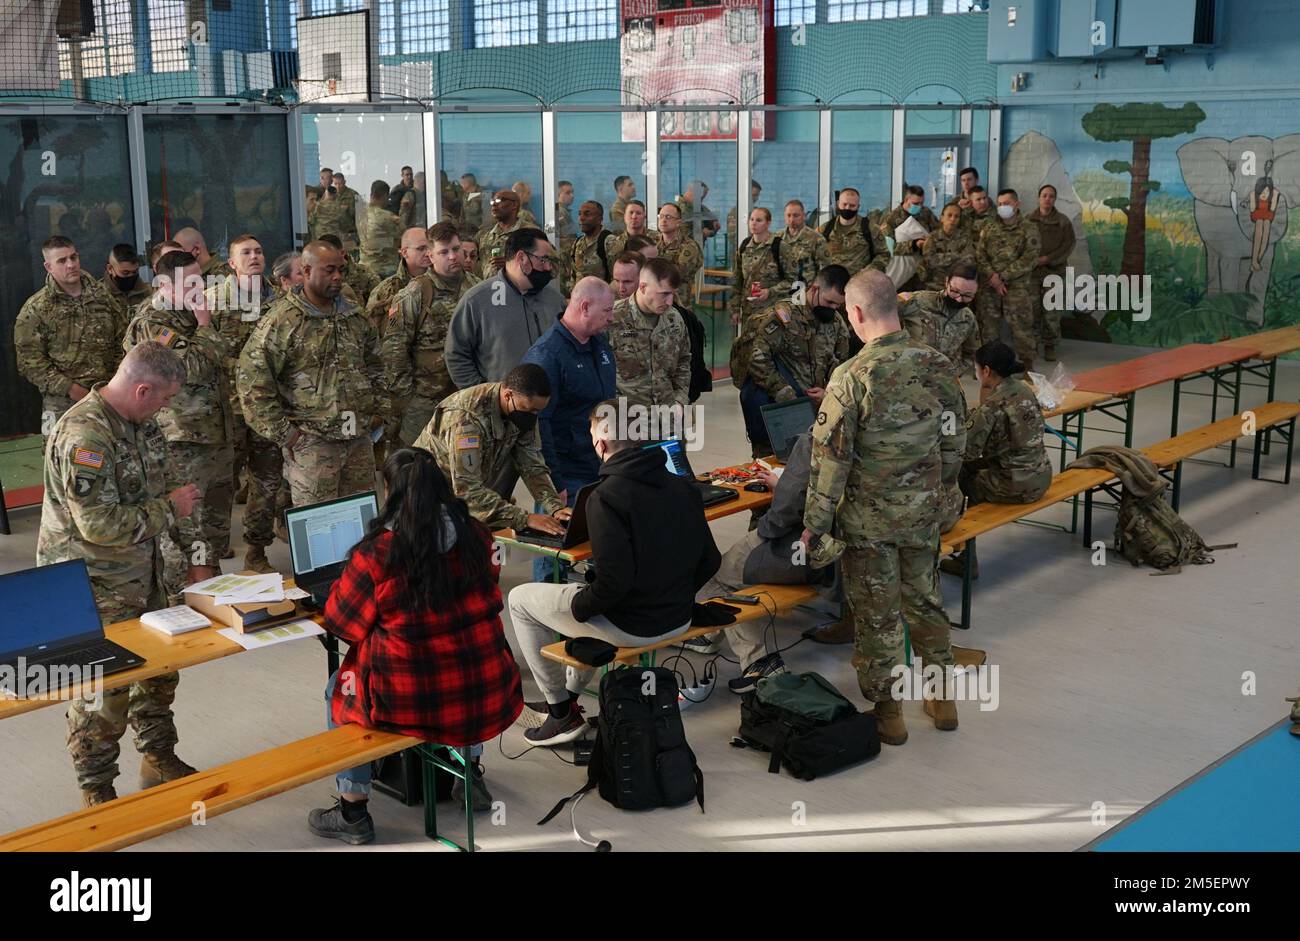 Soldiers from V Corps, Fort Knox, Ky., get their room assignments on Barton Barracks, Ansbach, Germany, March 8, 2022, as part of a deployment to Germany to build readiness, improve interoperability, reinforce allies and deter further Russian aggression. The deployment of U.S. forces here is a prudent measure that underpins NATO’s collective war-prevention aims, defensive orientation and commitment to protect all Allies. Stock Photo